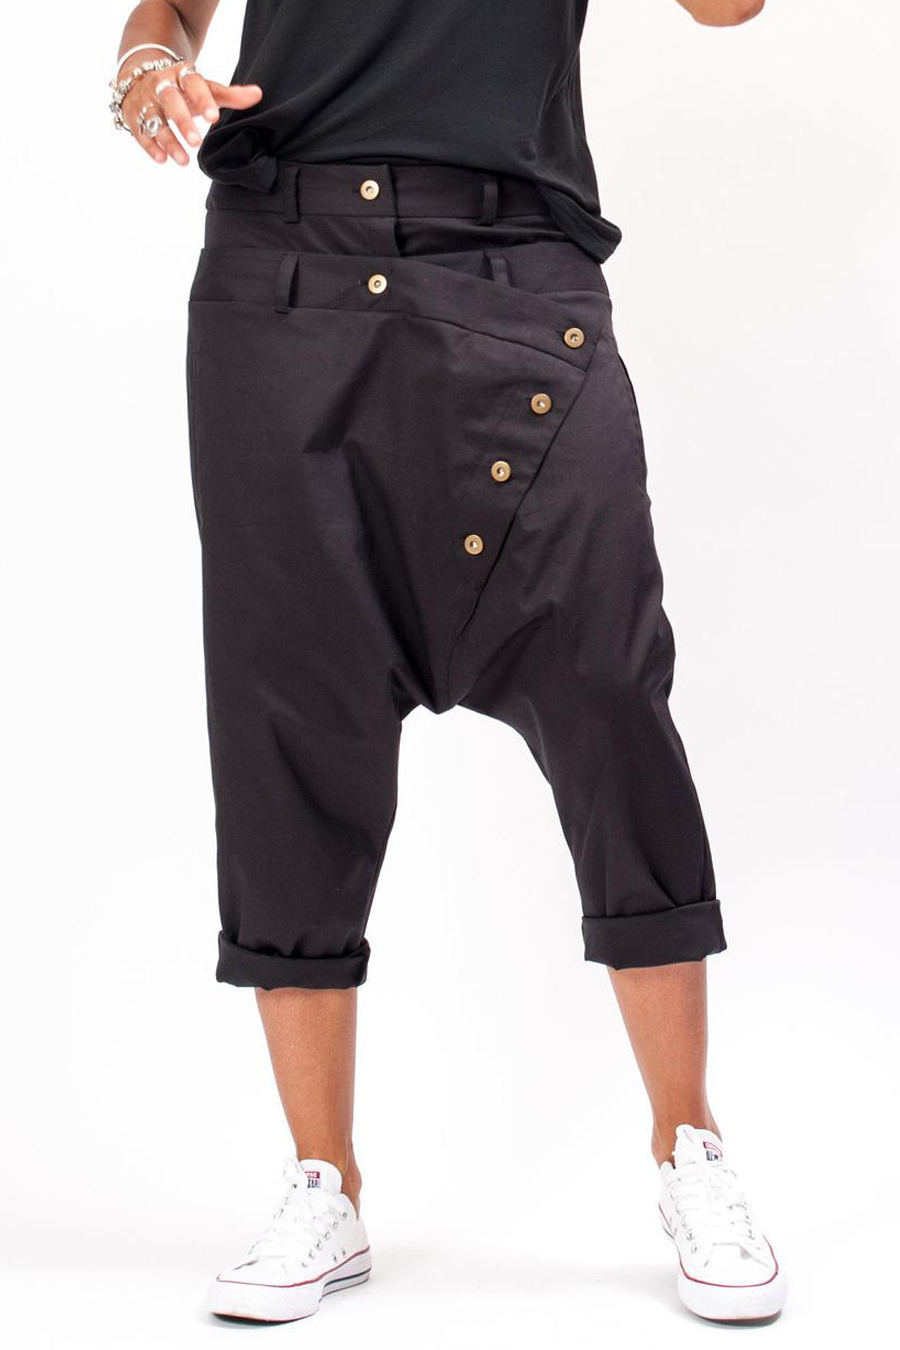 Harem Pants With Buttons - ALLSEAMS